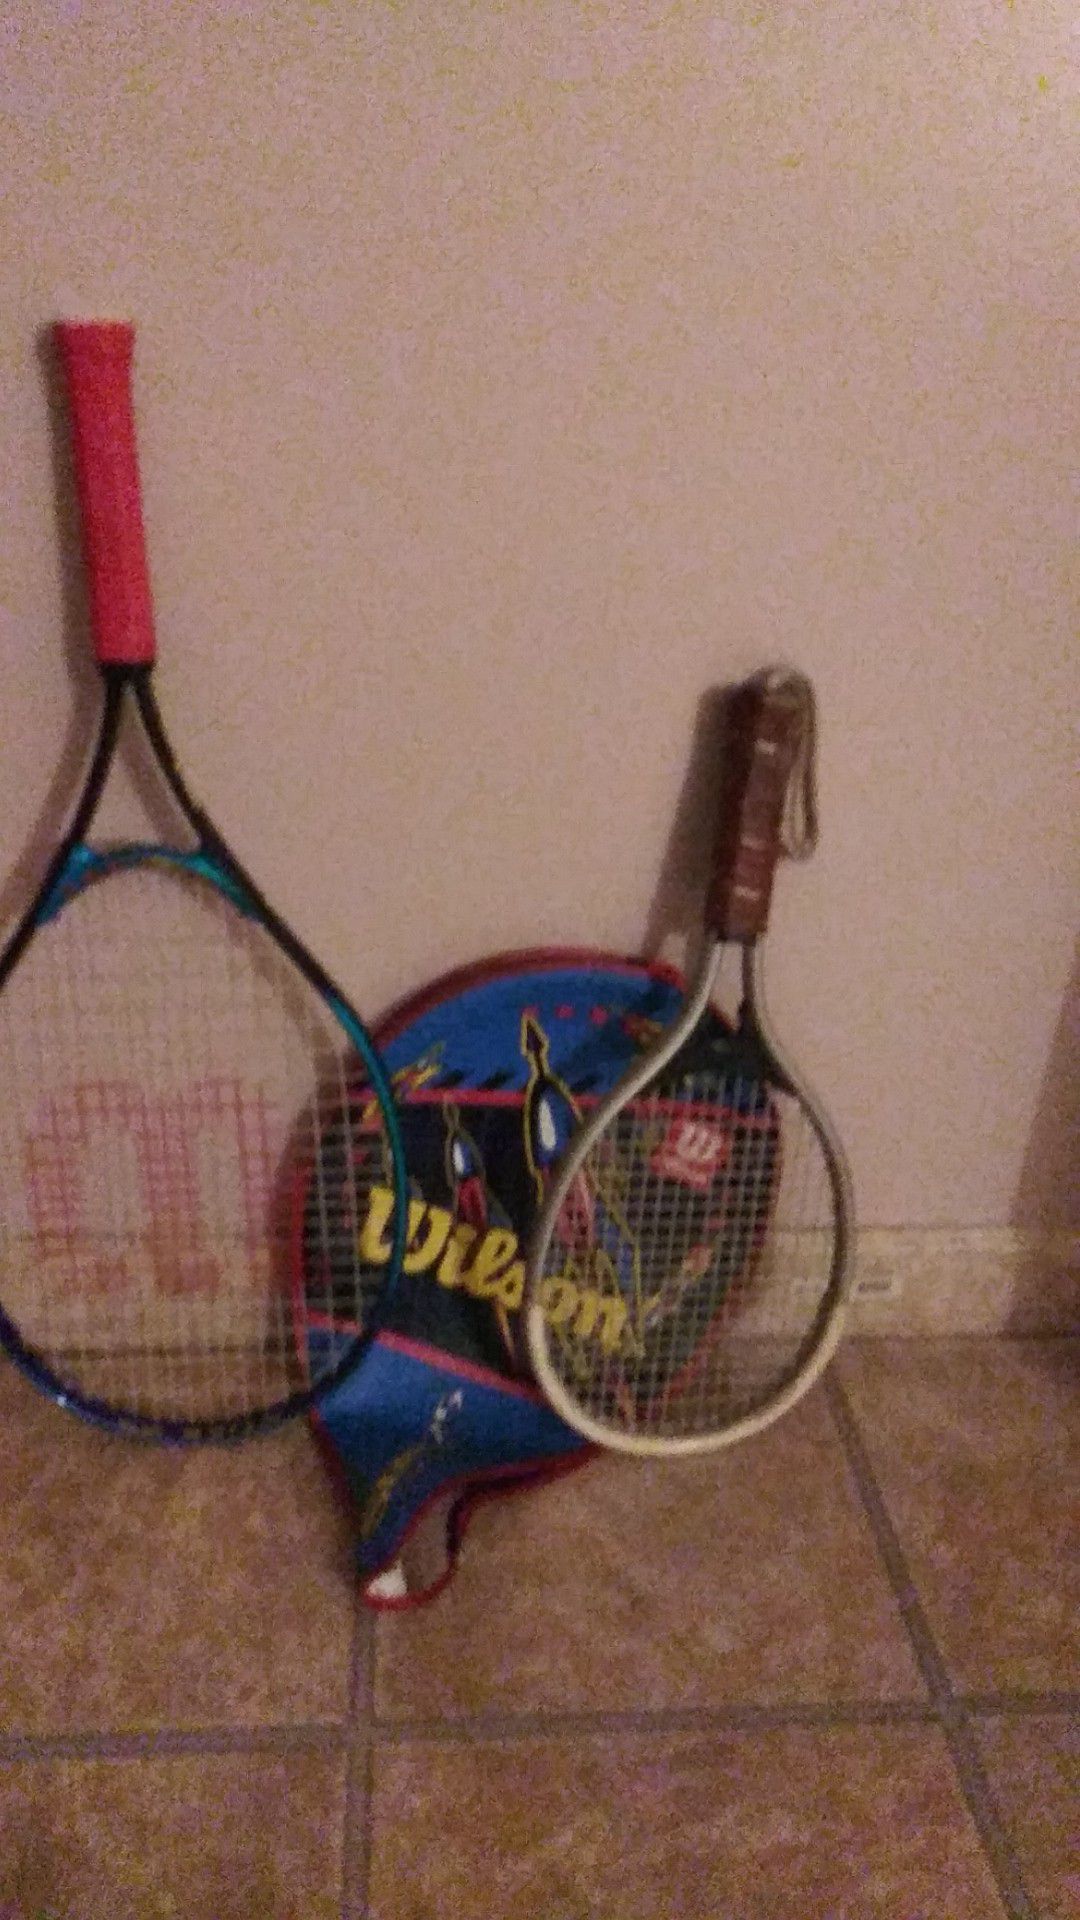 Tennis Racket 1 Wilson with cover